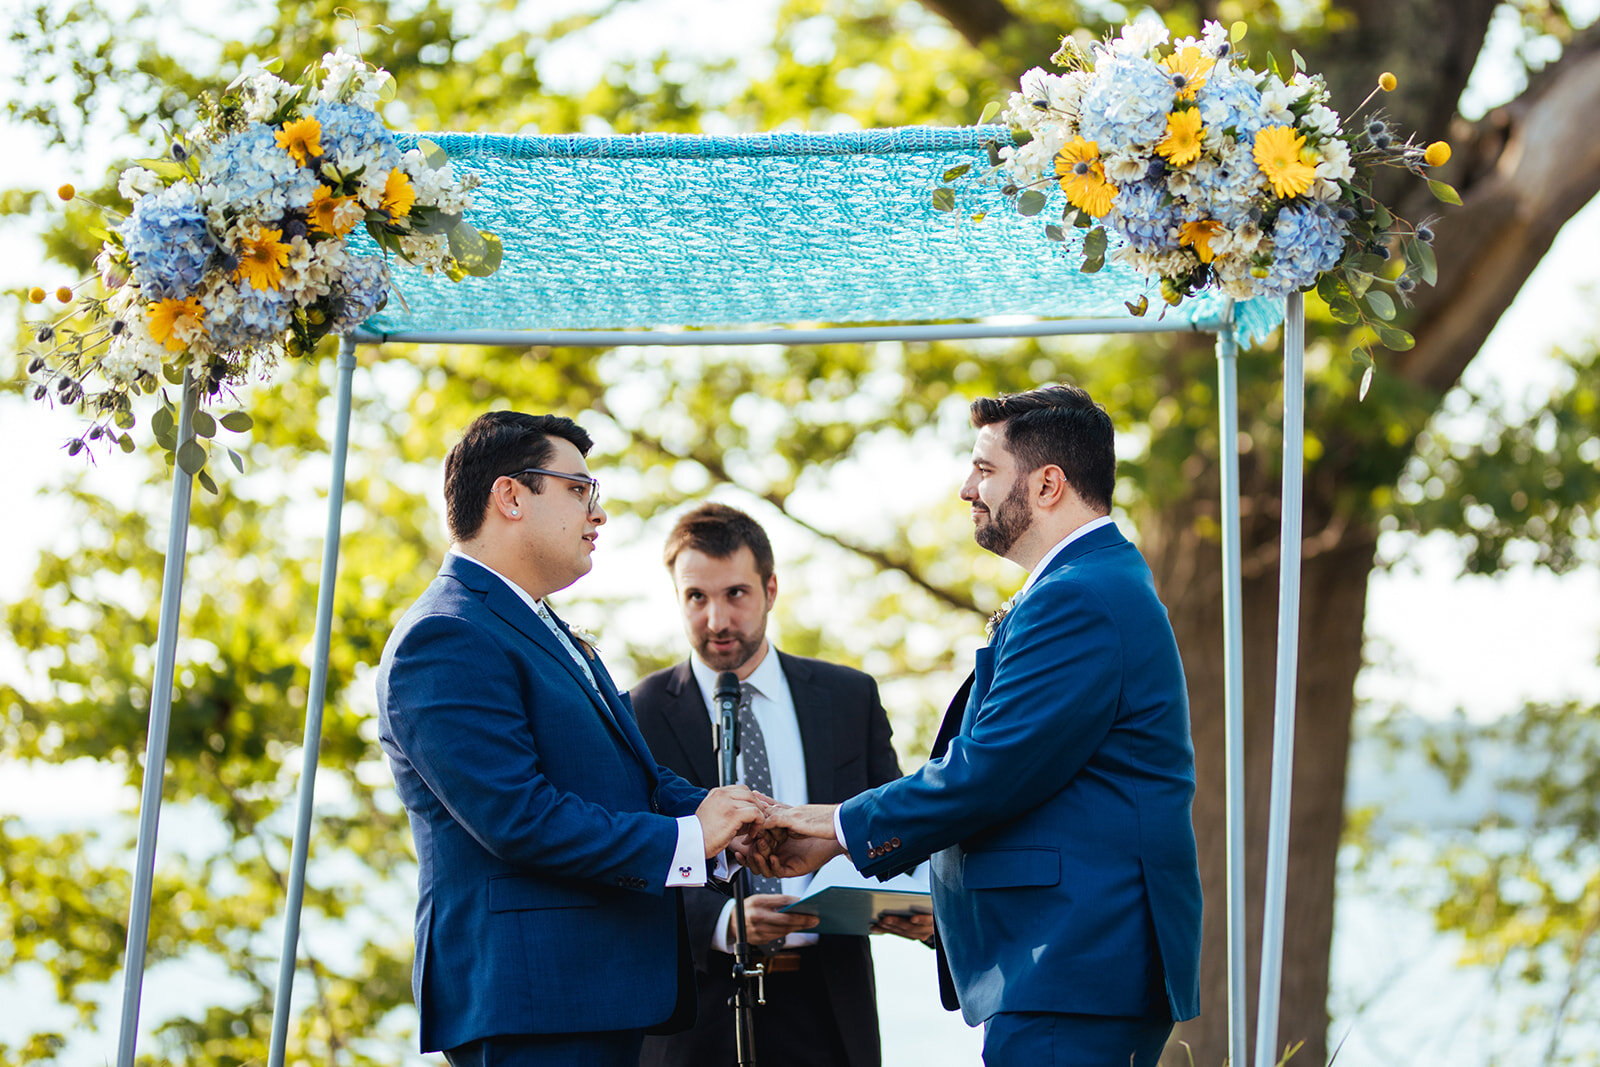 Officiant marrying a same sex couple on peaks island Portland ME Shawnee Custalow Queer wedding photography